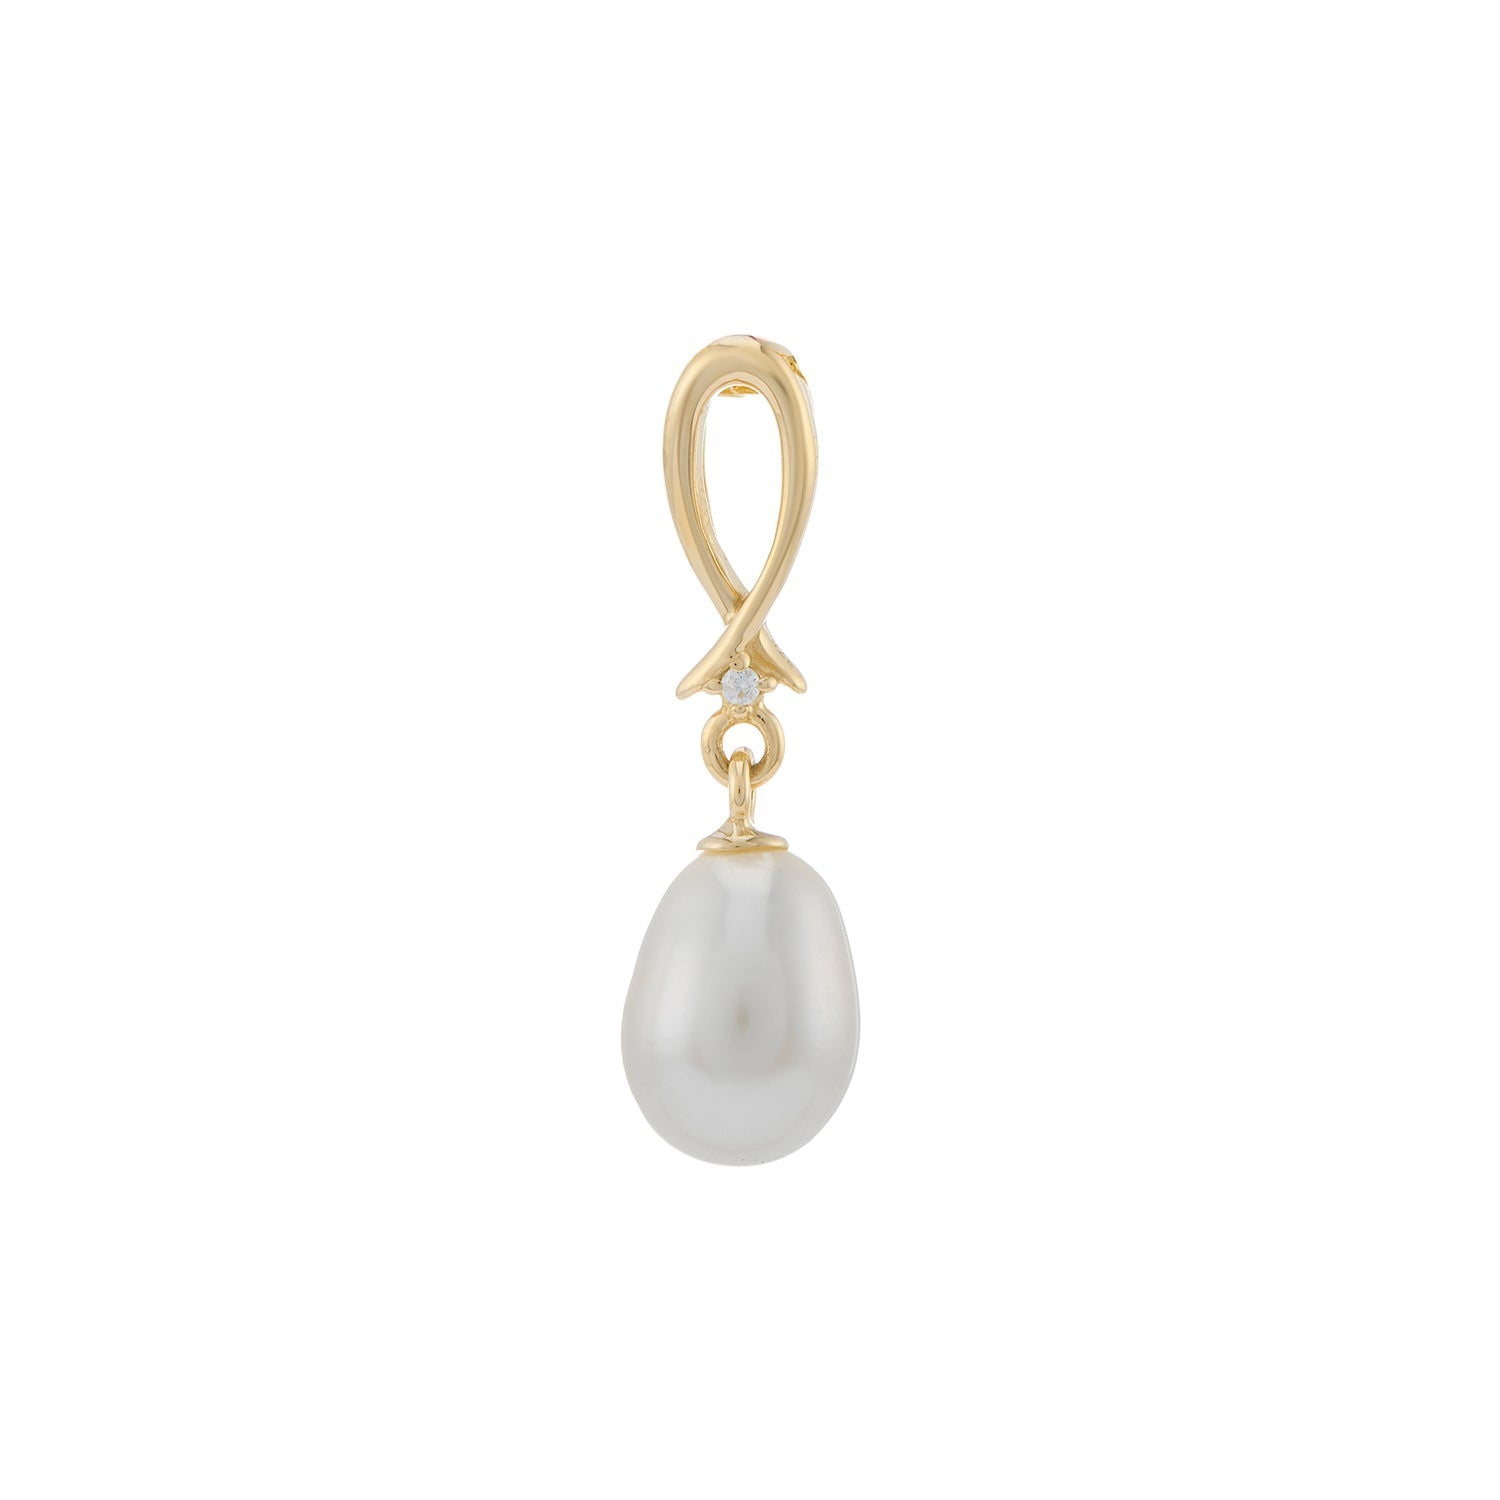 9ct gold freshwater pearl & cz pendant